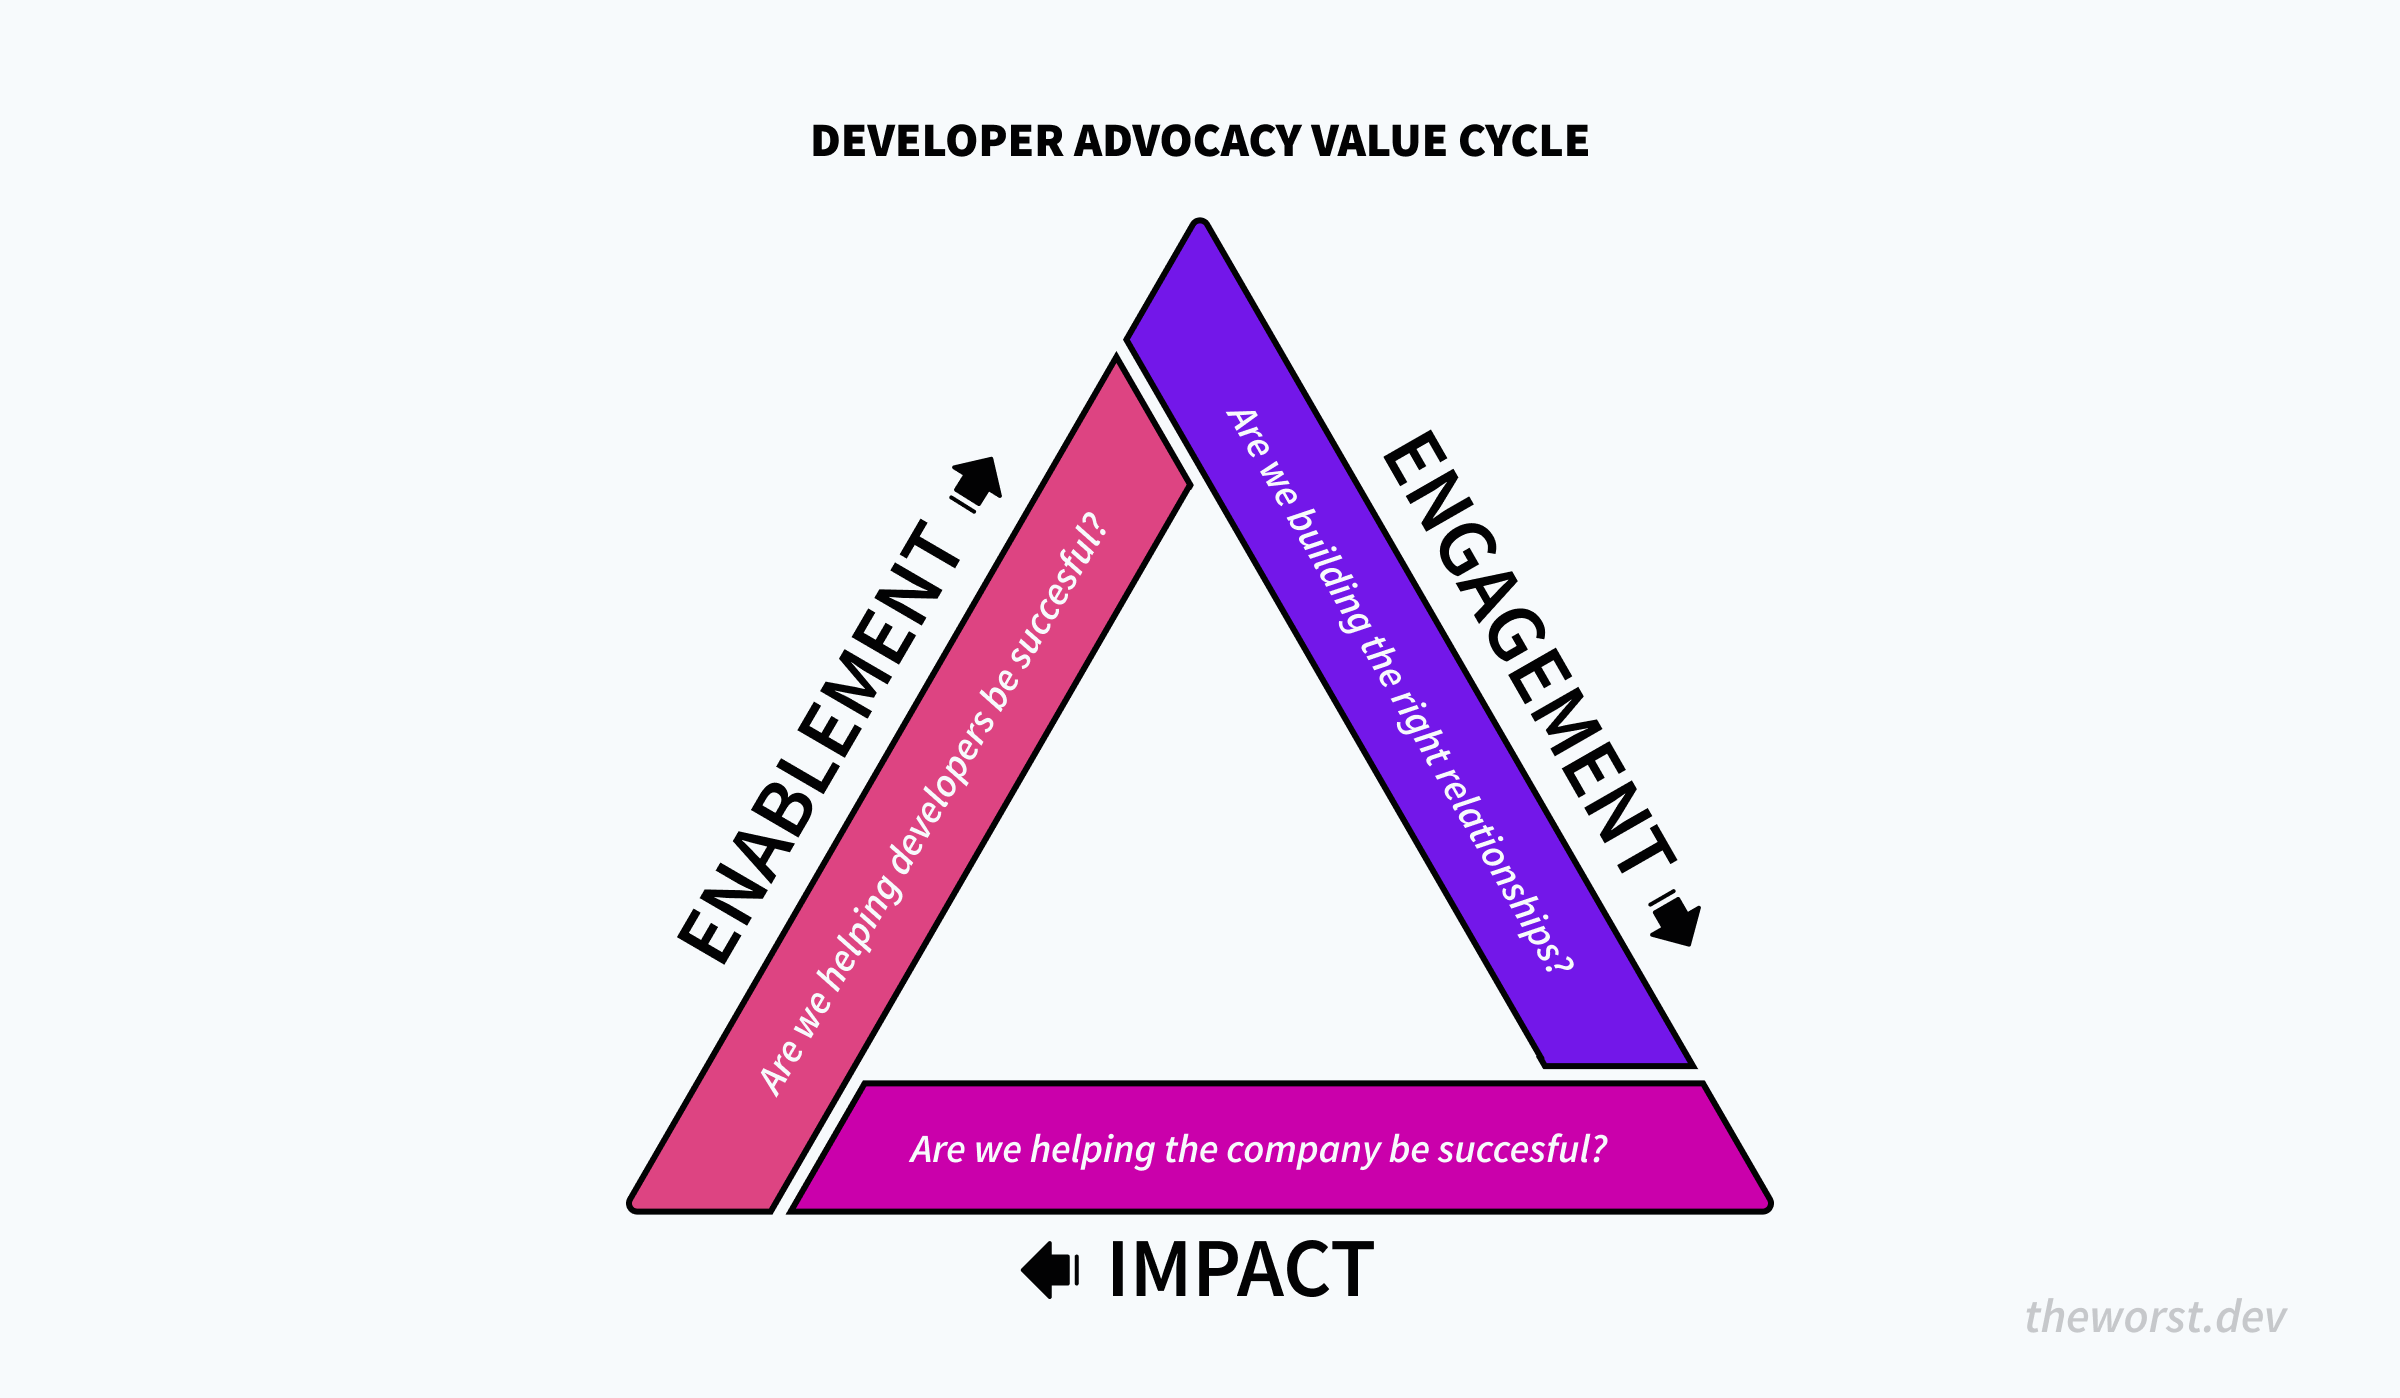 An illustration of a triangle divided into three equal sections symbolizing the three steps in the cycle. Each section is essentially one side of the trangle. The cycle starts with engagement, then goes to impact, and then to enablement. Each section has a label inside: Engagement - Are we building the right relationships? Impact - Are we helping the company be successful? Enablement - Are we helping developers be successful?